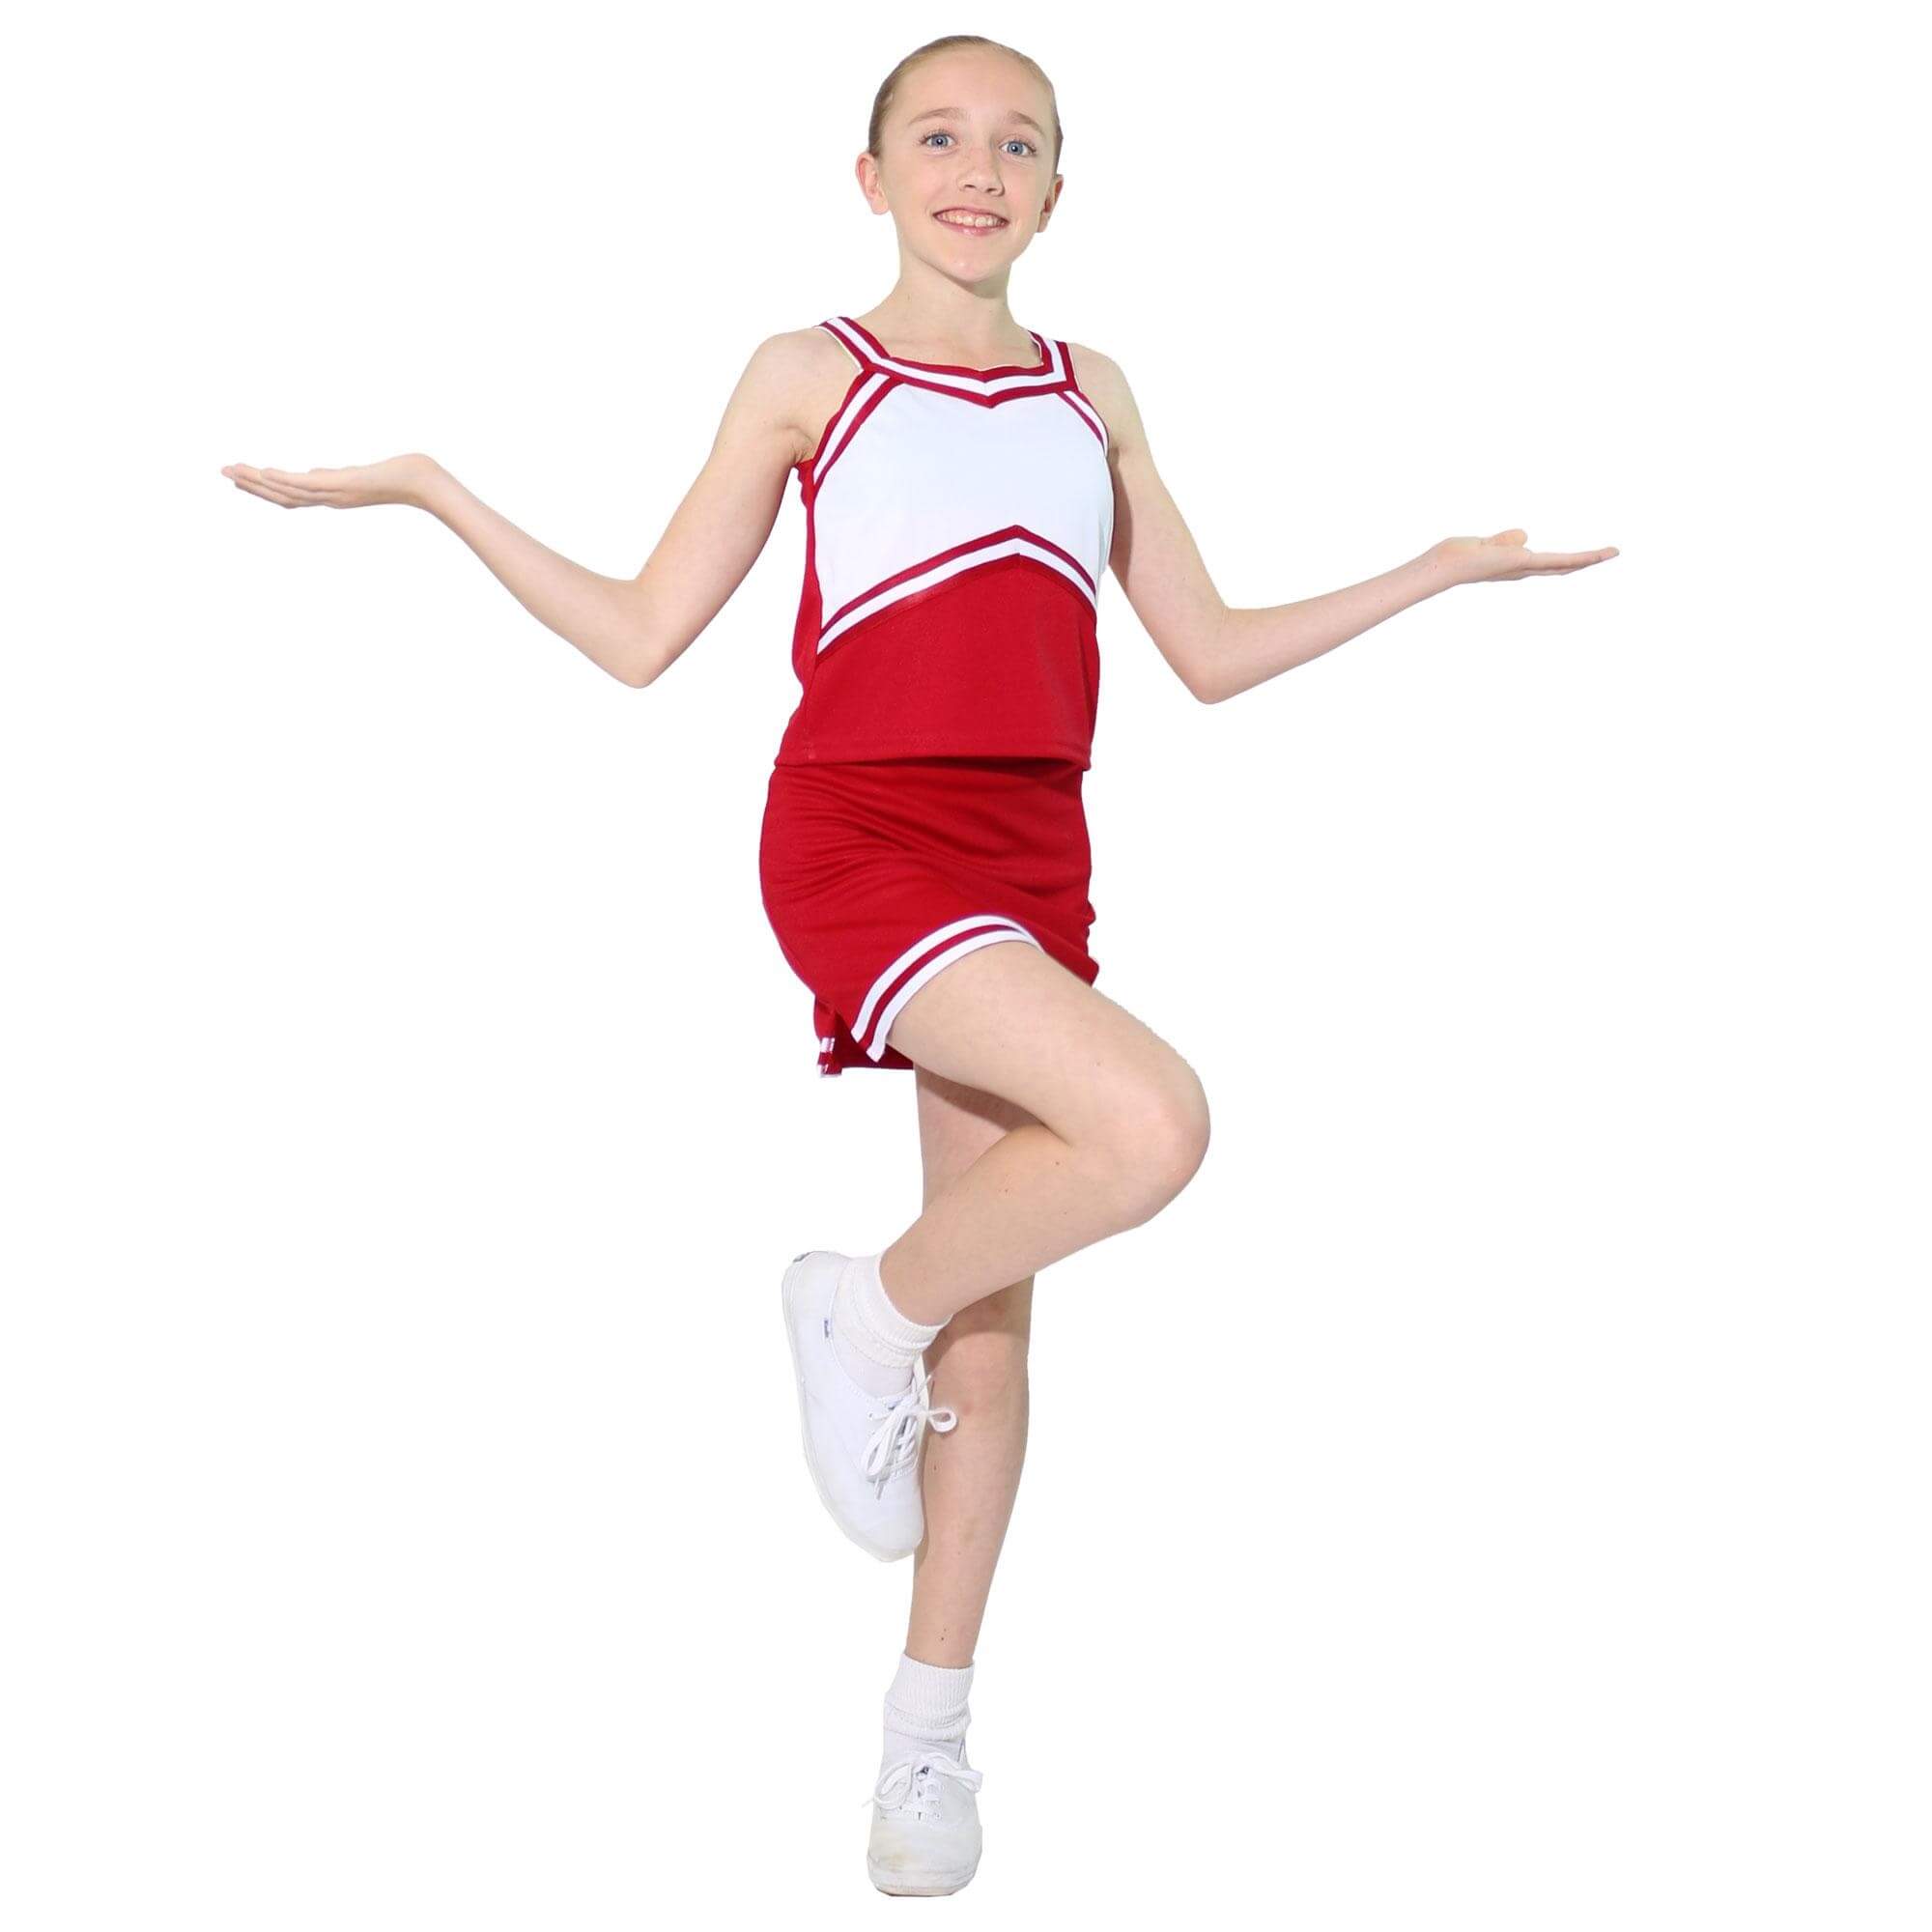 Danzcue Child Sweetheart Cheerleaders Uniform Shell Top - Click Image to Close